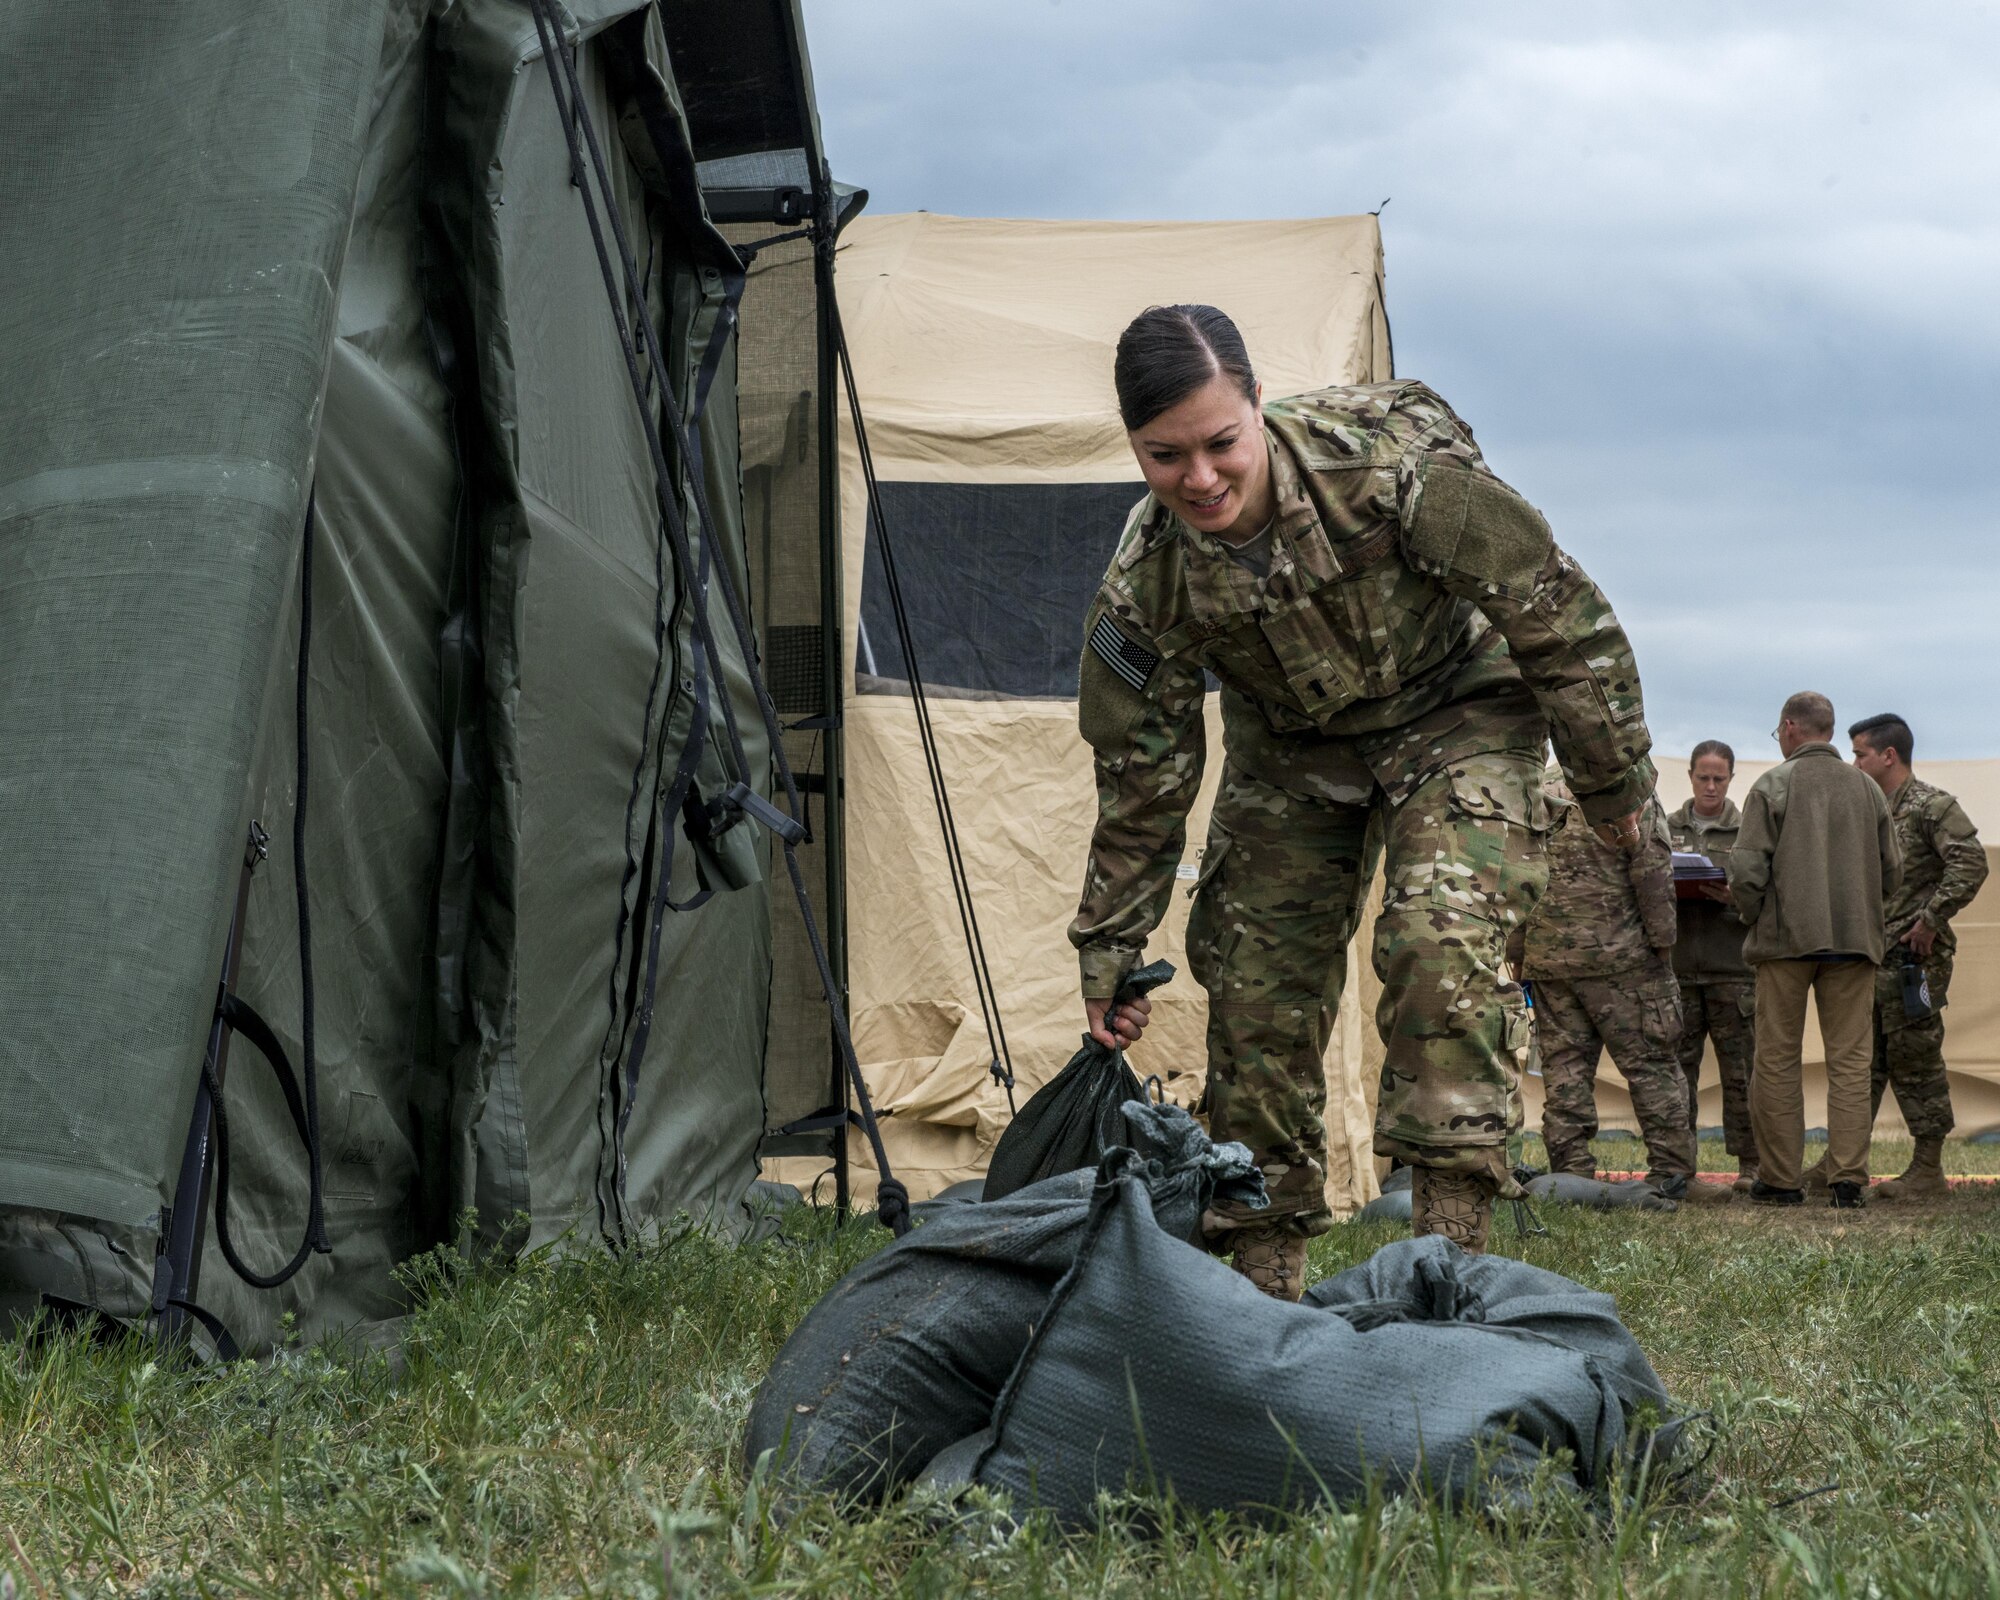 1st Lt. Christine Bovee, a communications officer assigned to the 352d Special Operations Support Squadron, moves sandbags while rerouting cabling in Powidz, Poland during TROJAN FOOTPRINT 16, May 18, 2016.  Approximately 200 aircrew, maintenance and support personnel deployed to Poland during TF16 to support MC-130J Commando II’s, CV-22 Ospreys and MH-47 Chinooks deployed for joint, combined training with NATO allies. (U.S. Air Force photo by 1st Lt. Chris Sullivan/Released)